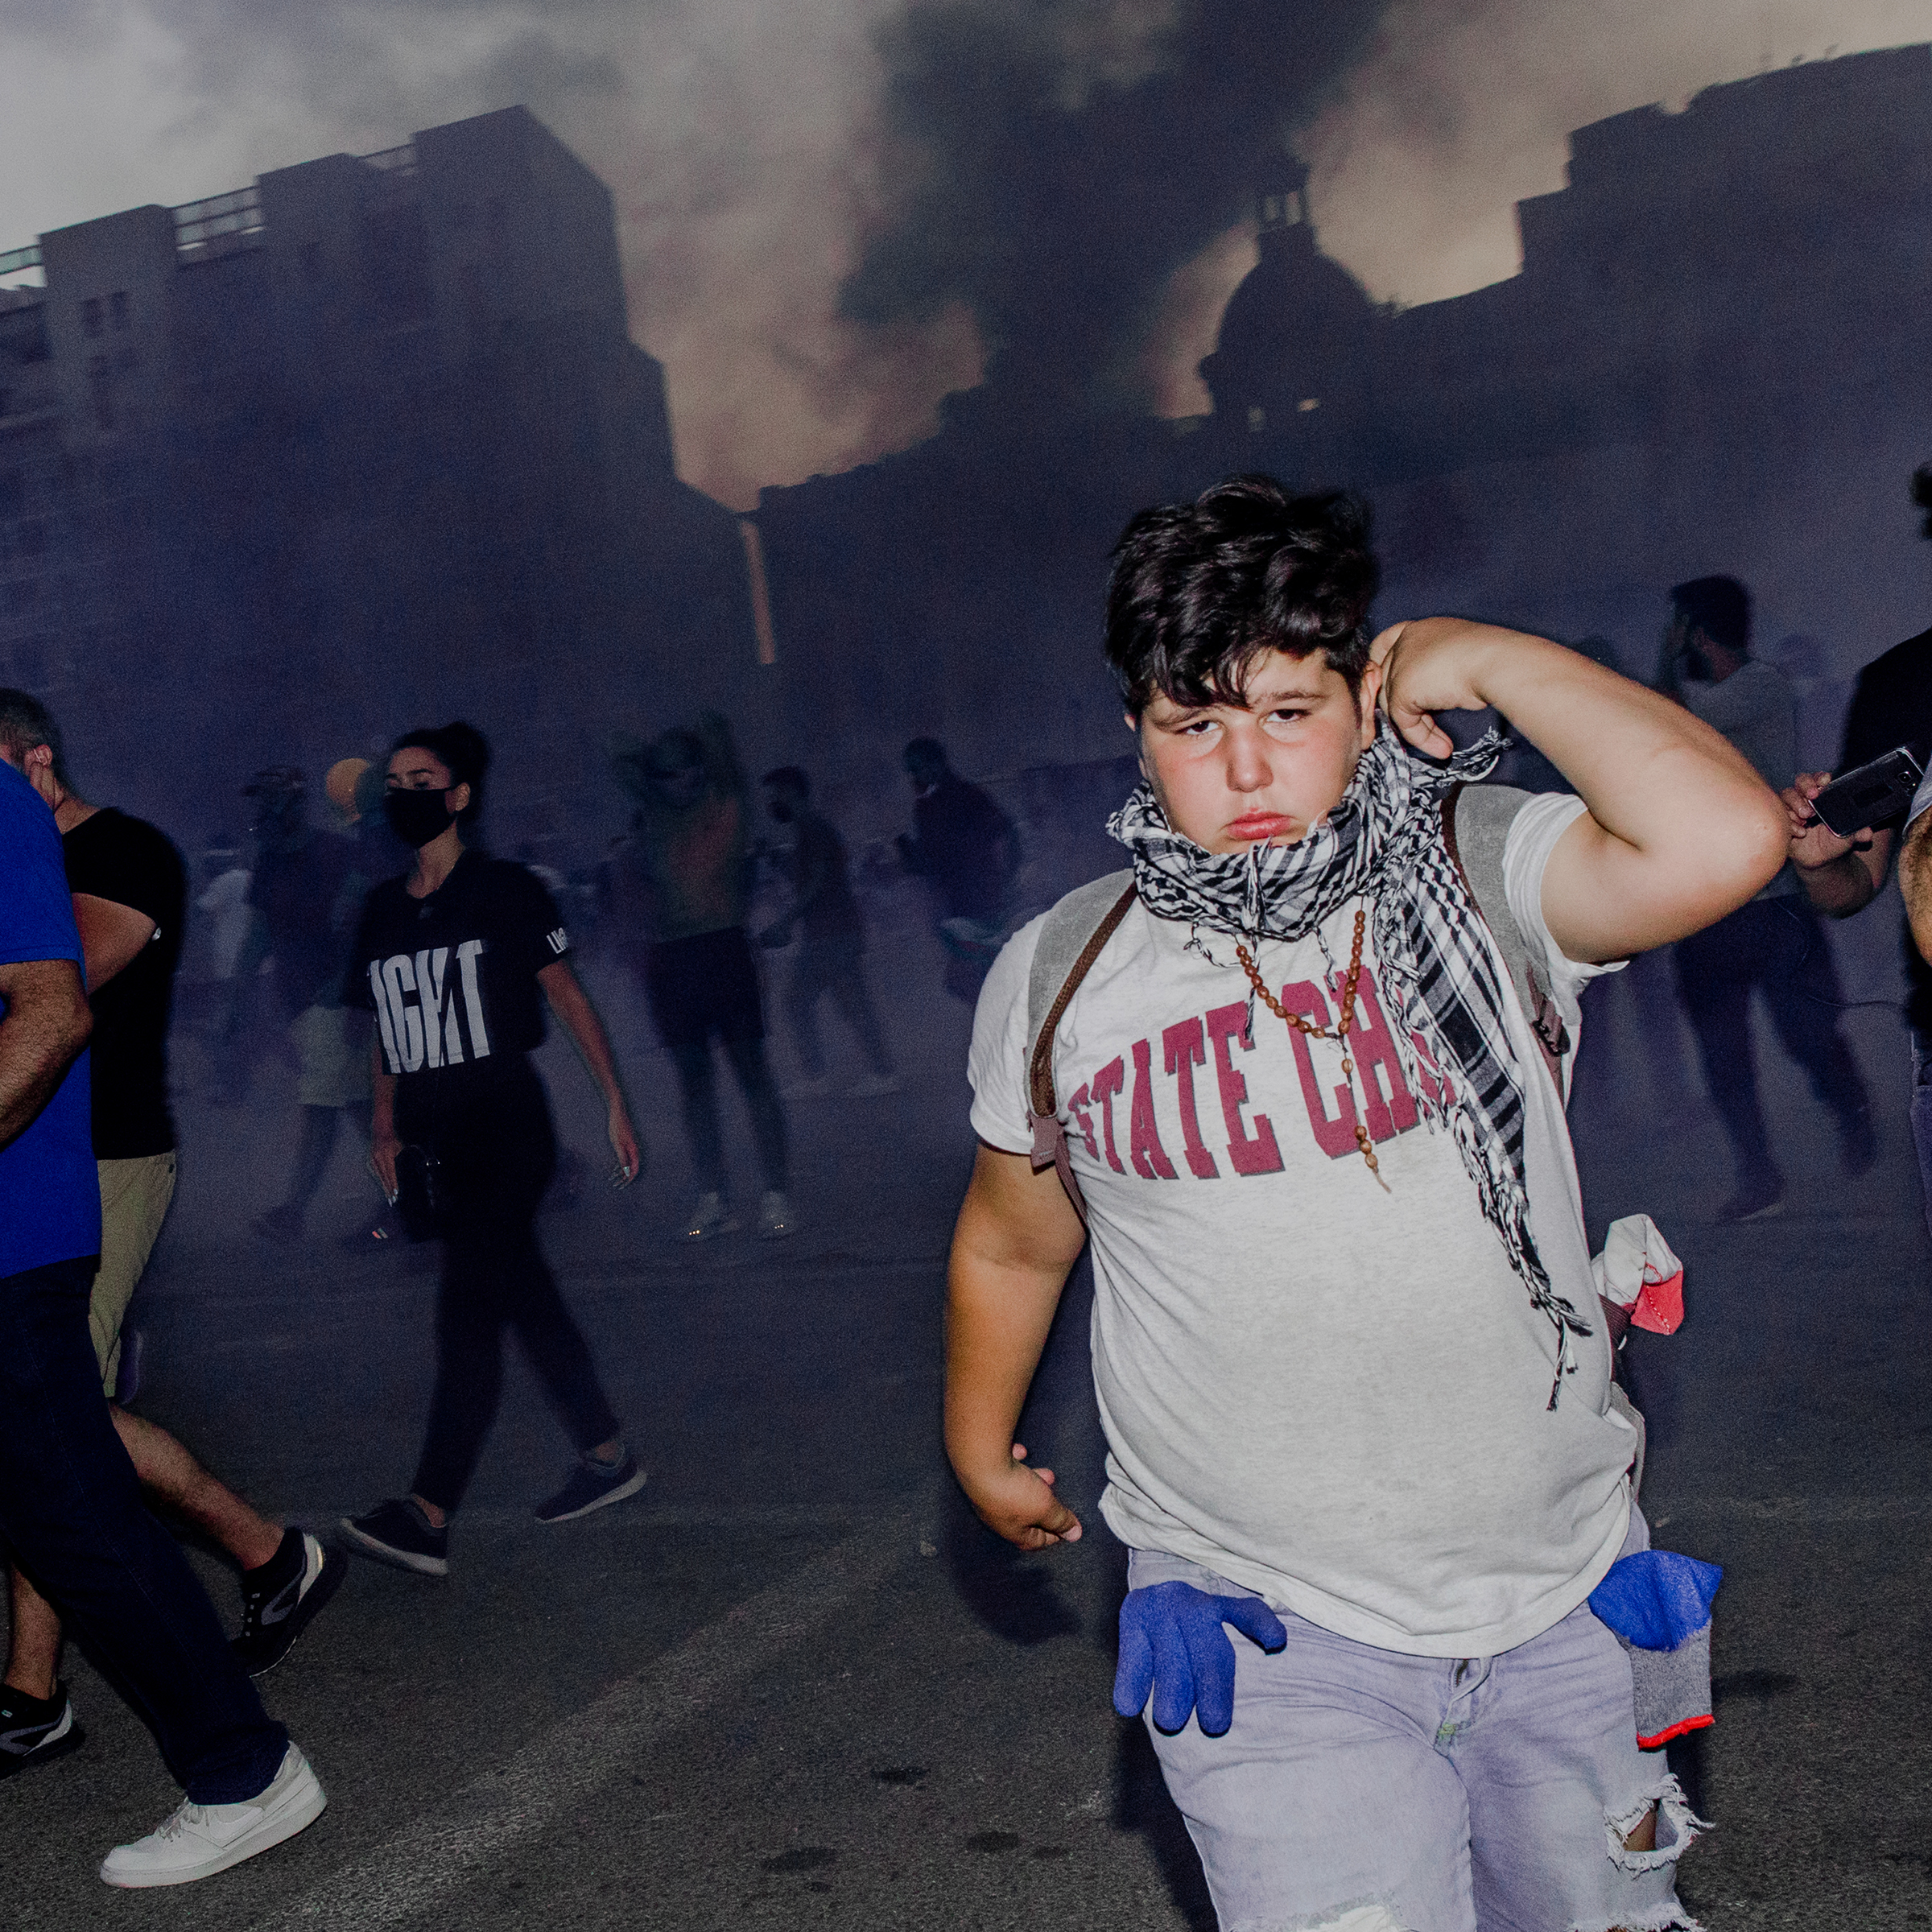 A young protester near Beirut's Martyrs' Square during the Aug. 8 demonstration.